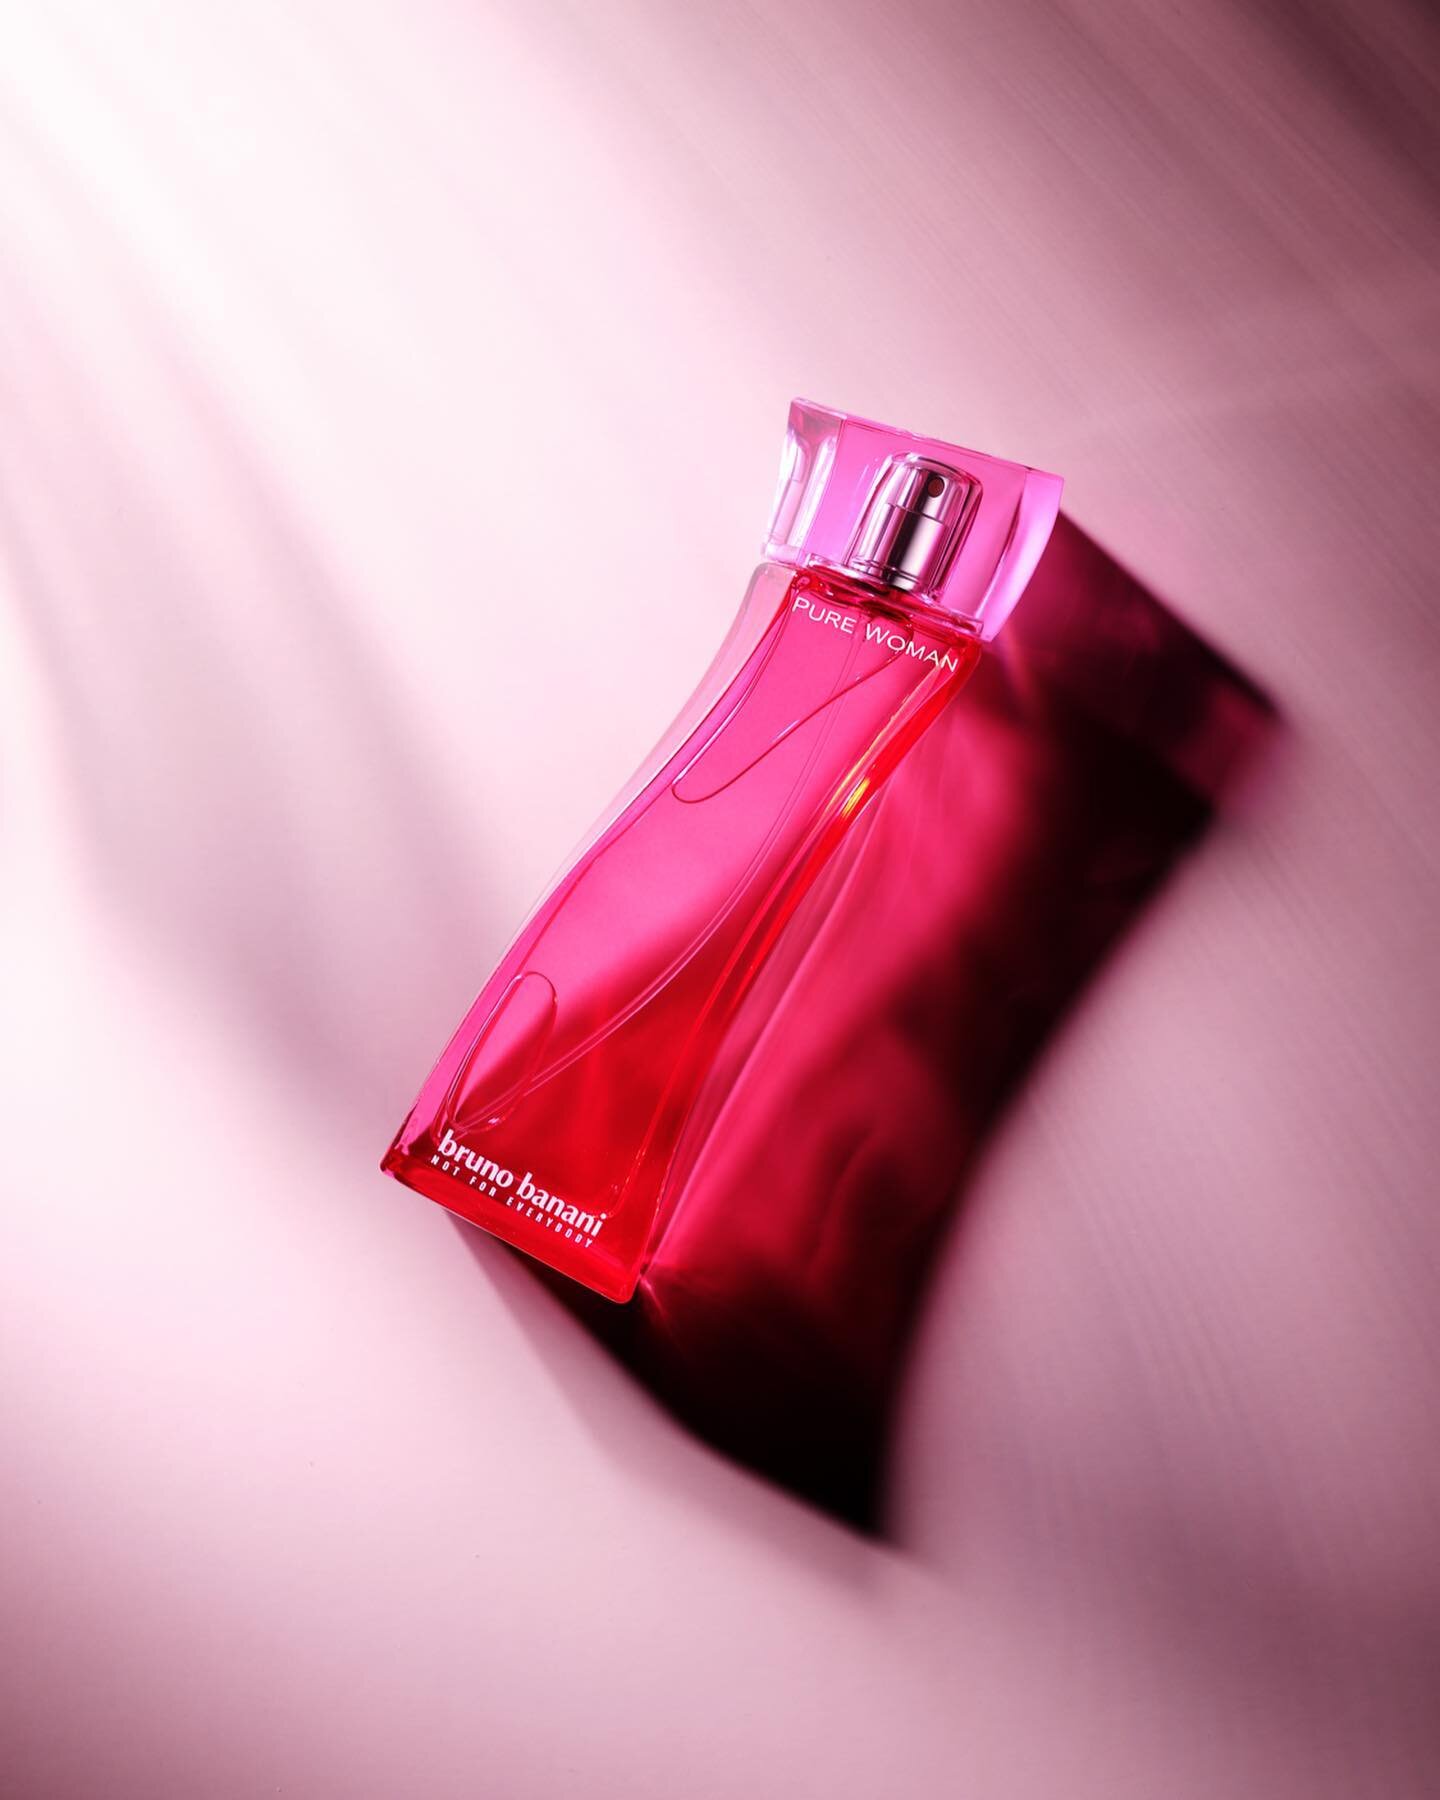 a pop of pink from the fragrance archives featuring @brunobananiofficial #fragrancephotography #fragrance #perfume #productphotography #londonphotographer #studiophotography